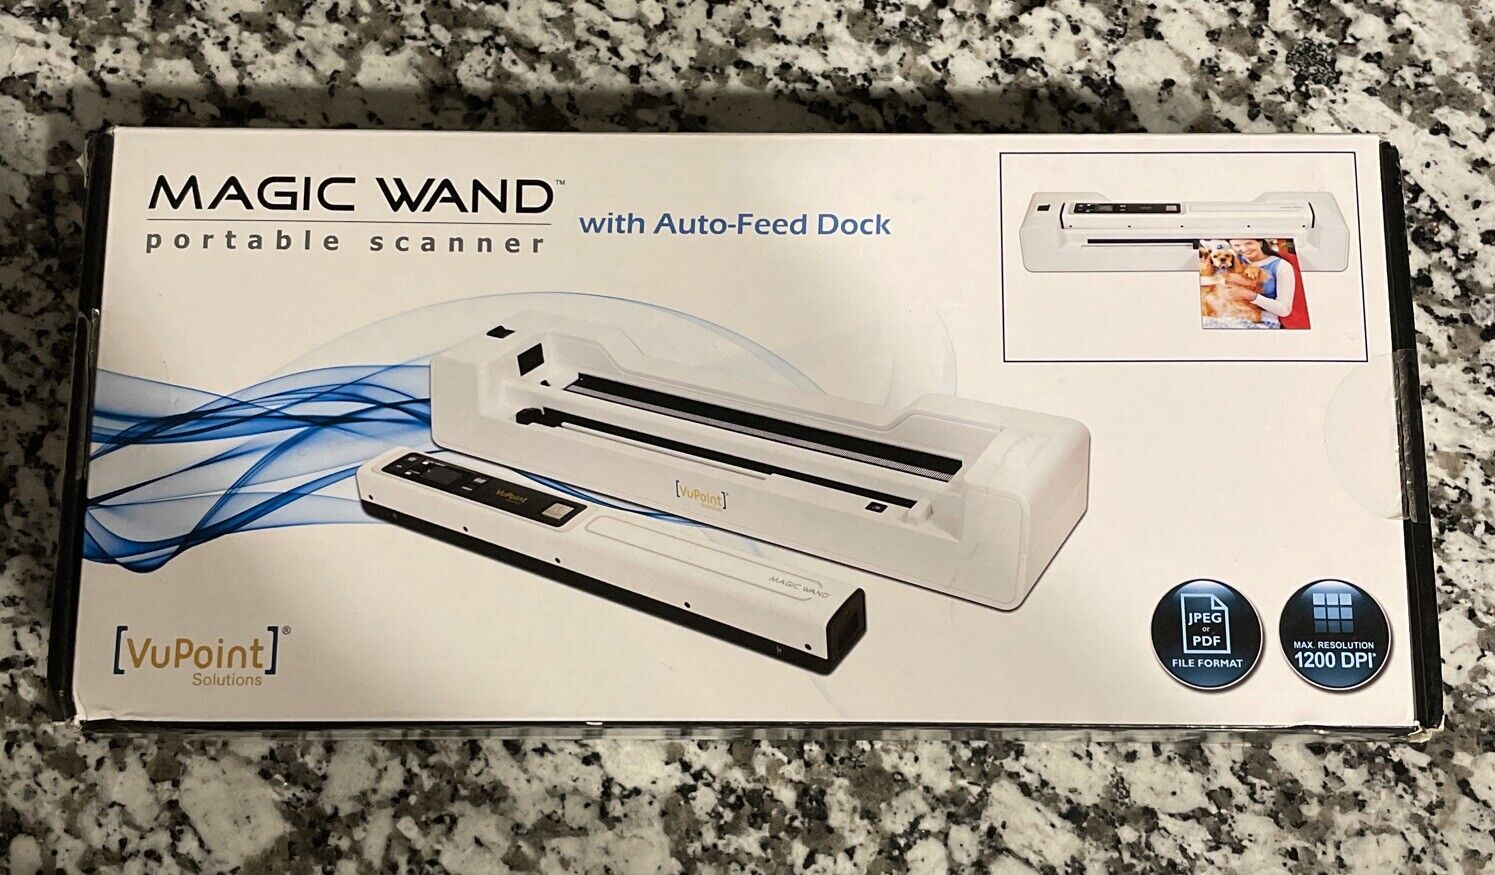 VuPoint Magic Wand Portable Handheld Scanner + Auto-Feed Dock Complete in Box